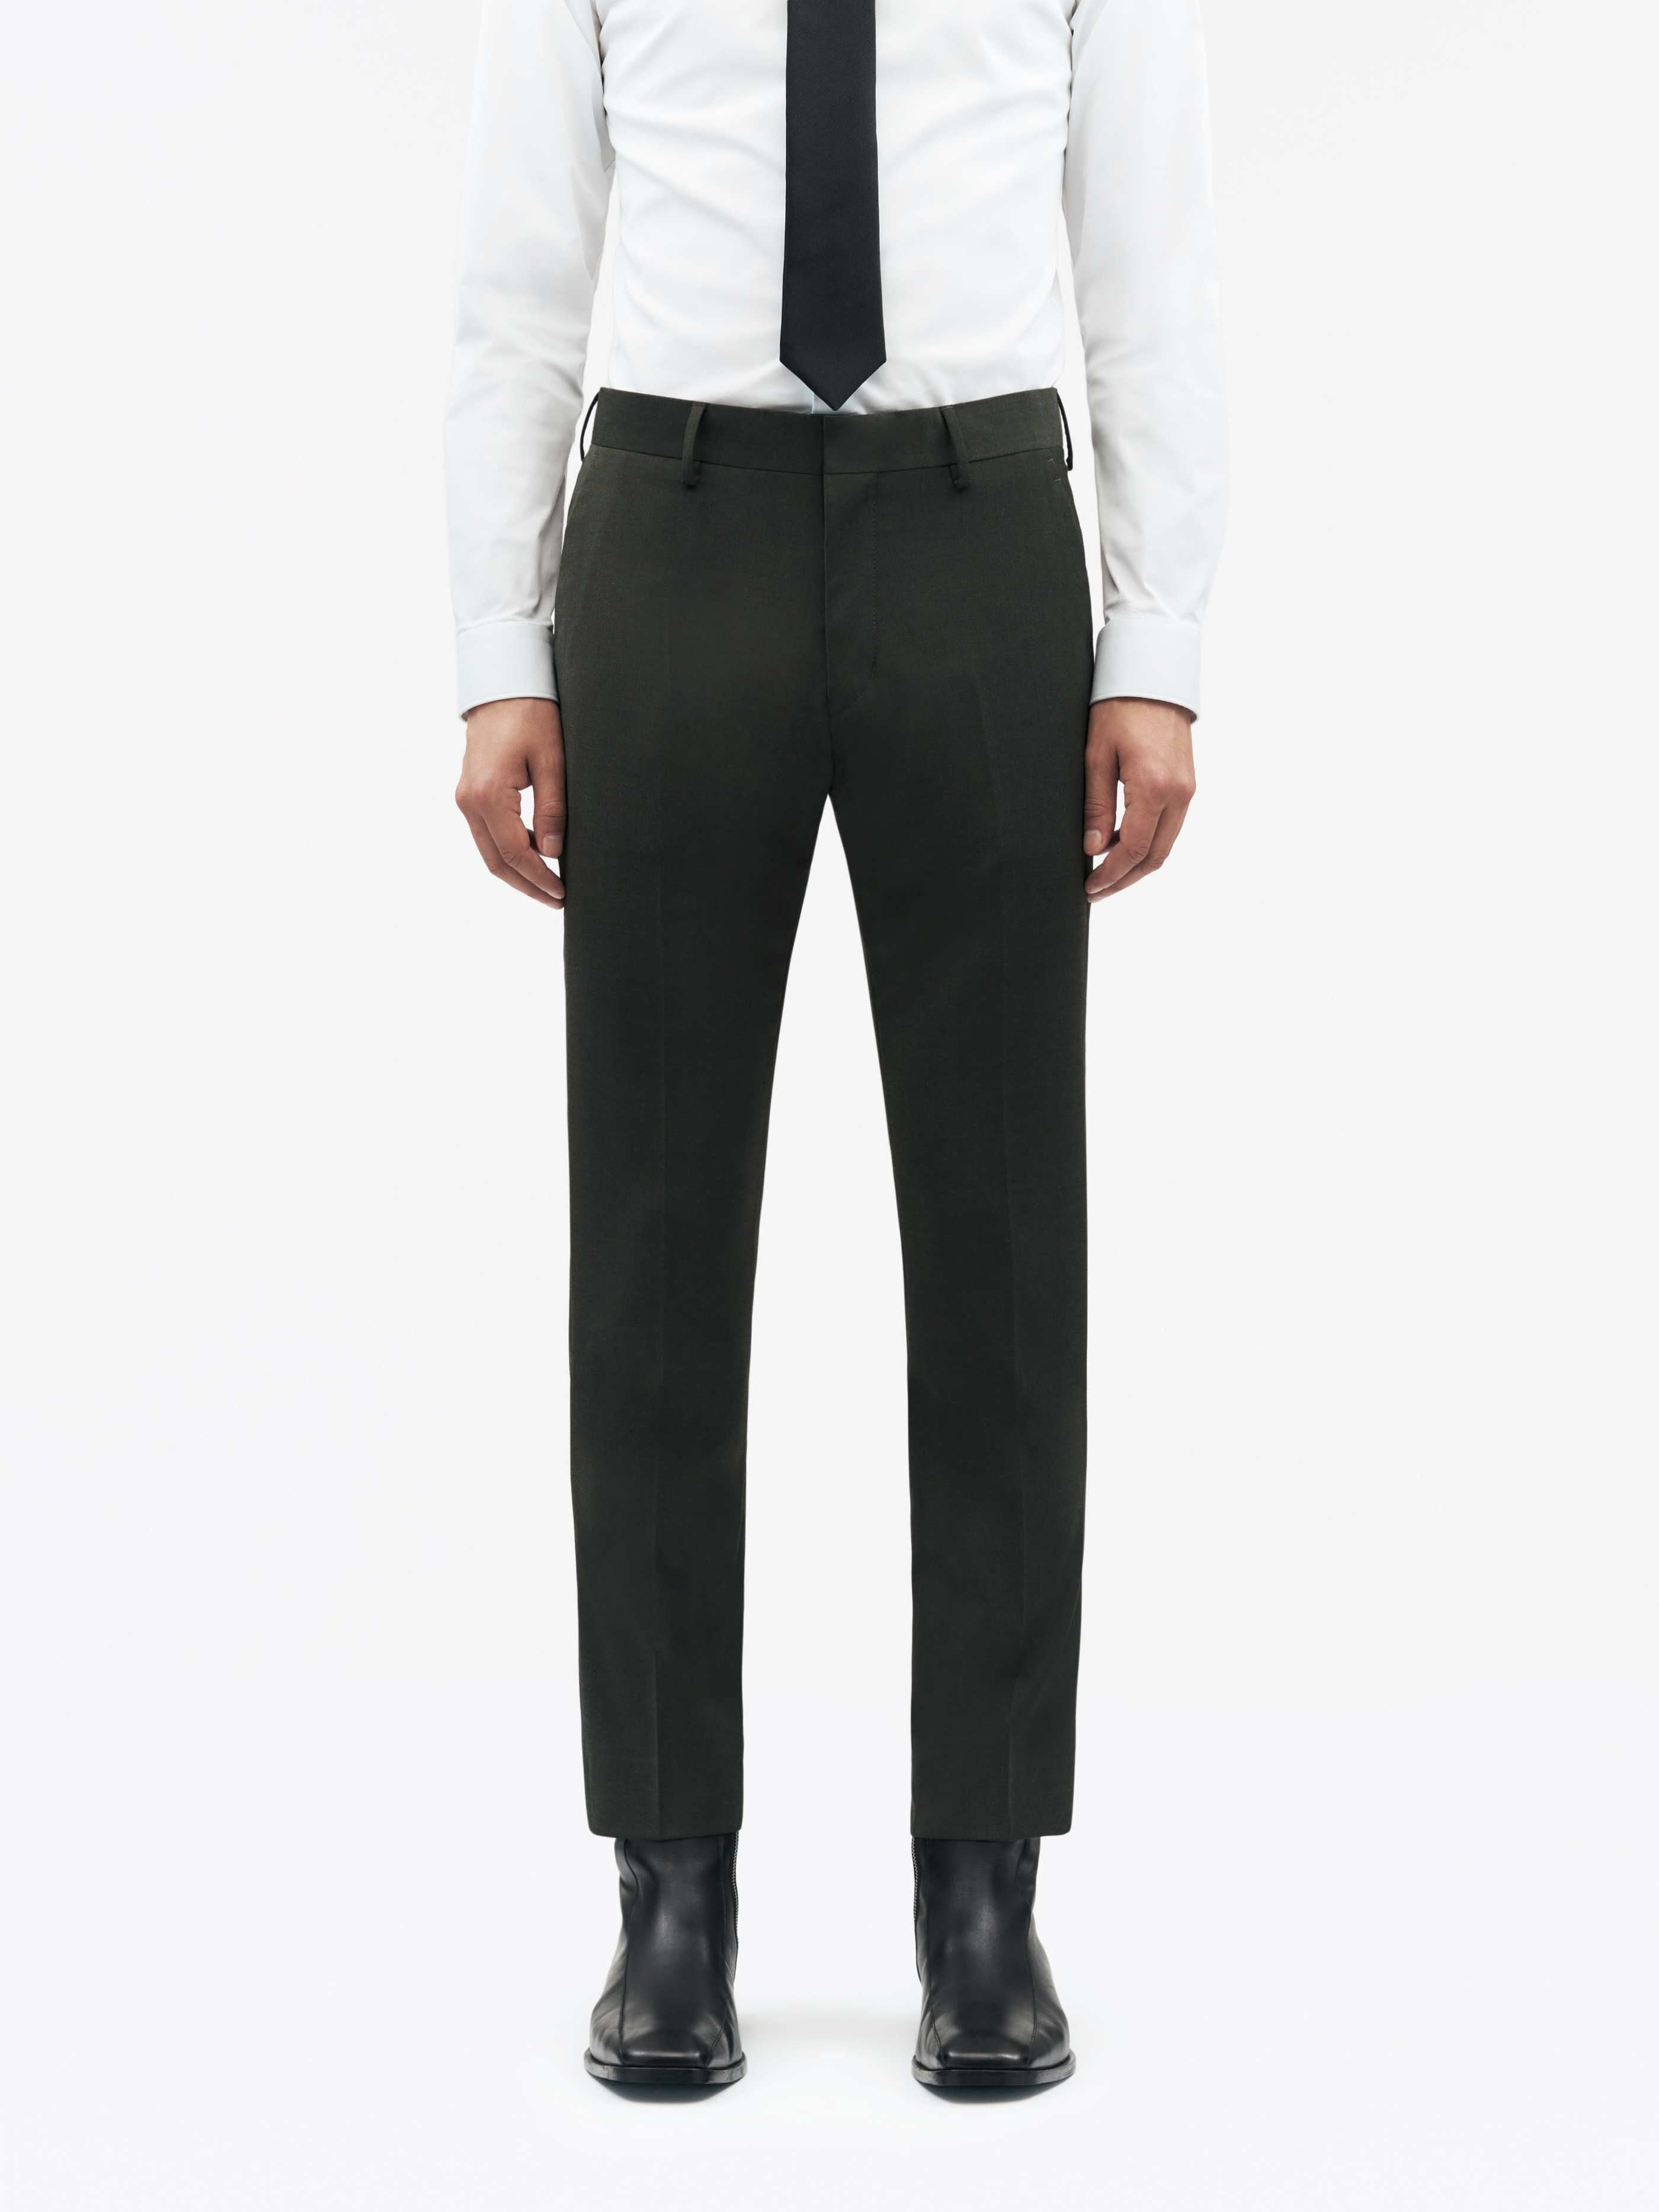 Tiger Of Sweden Tenutas Stretch Trousers in Dark Green T70699013Z | Shop from eightywingold an official brand partner for Tiger Of Sweden in Canada and US.